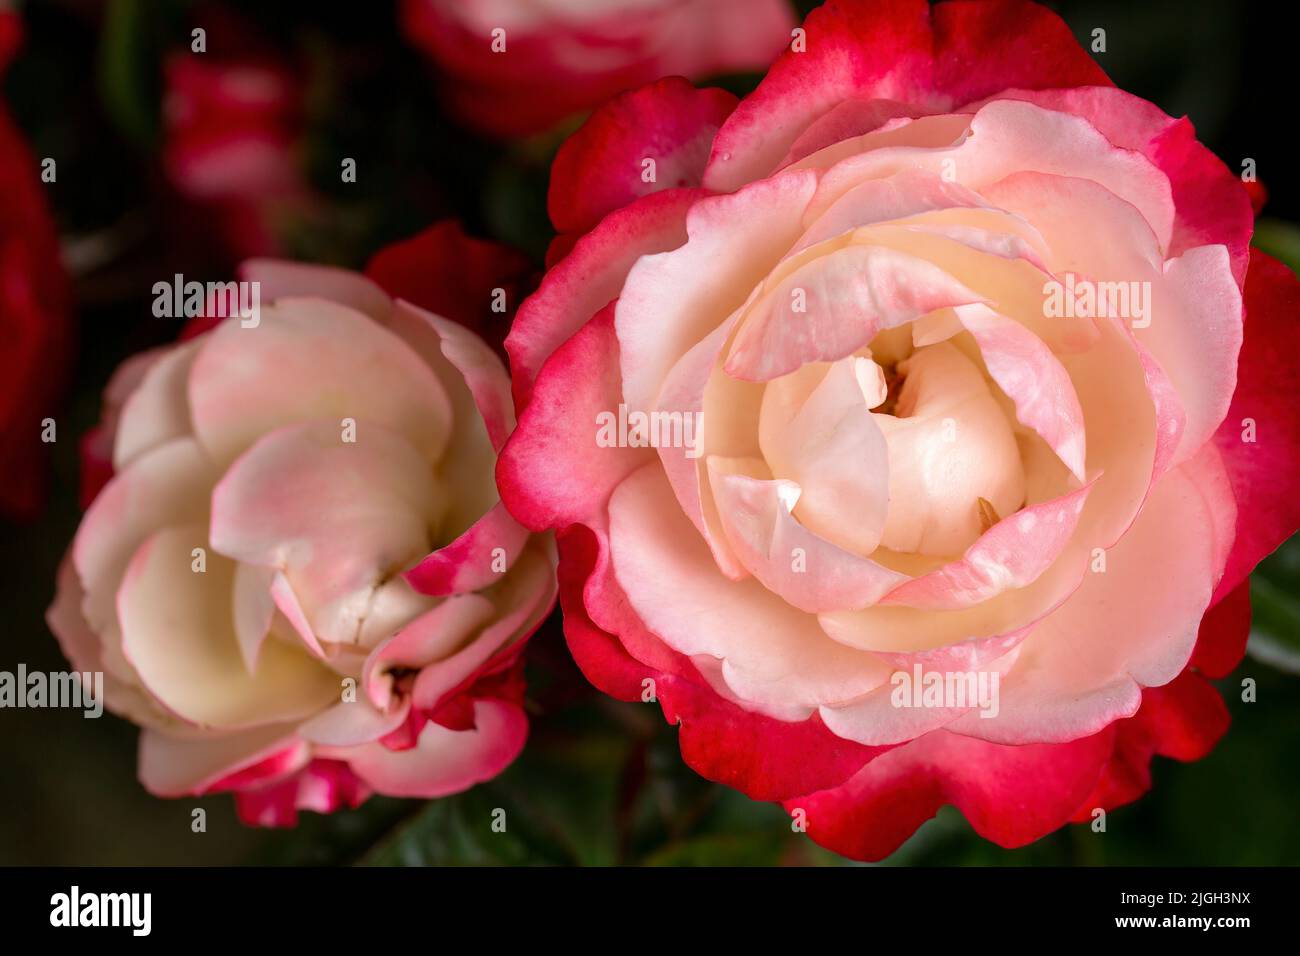 Red and white rose flower bloom in the garden Stock Photo